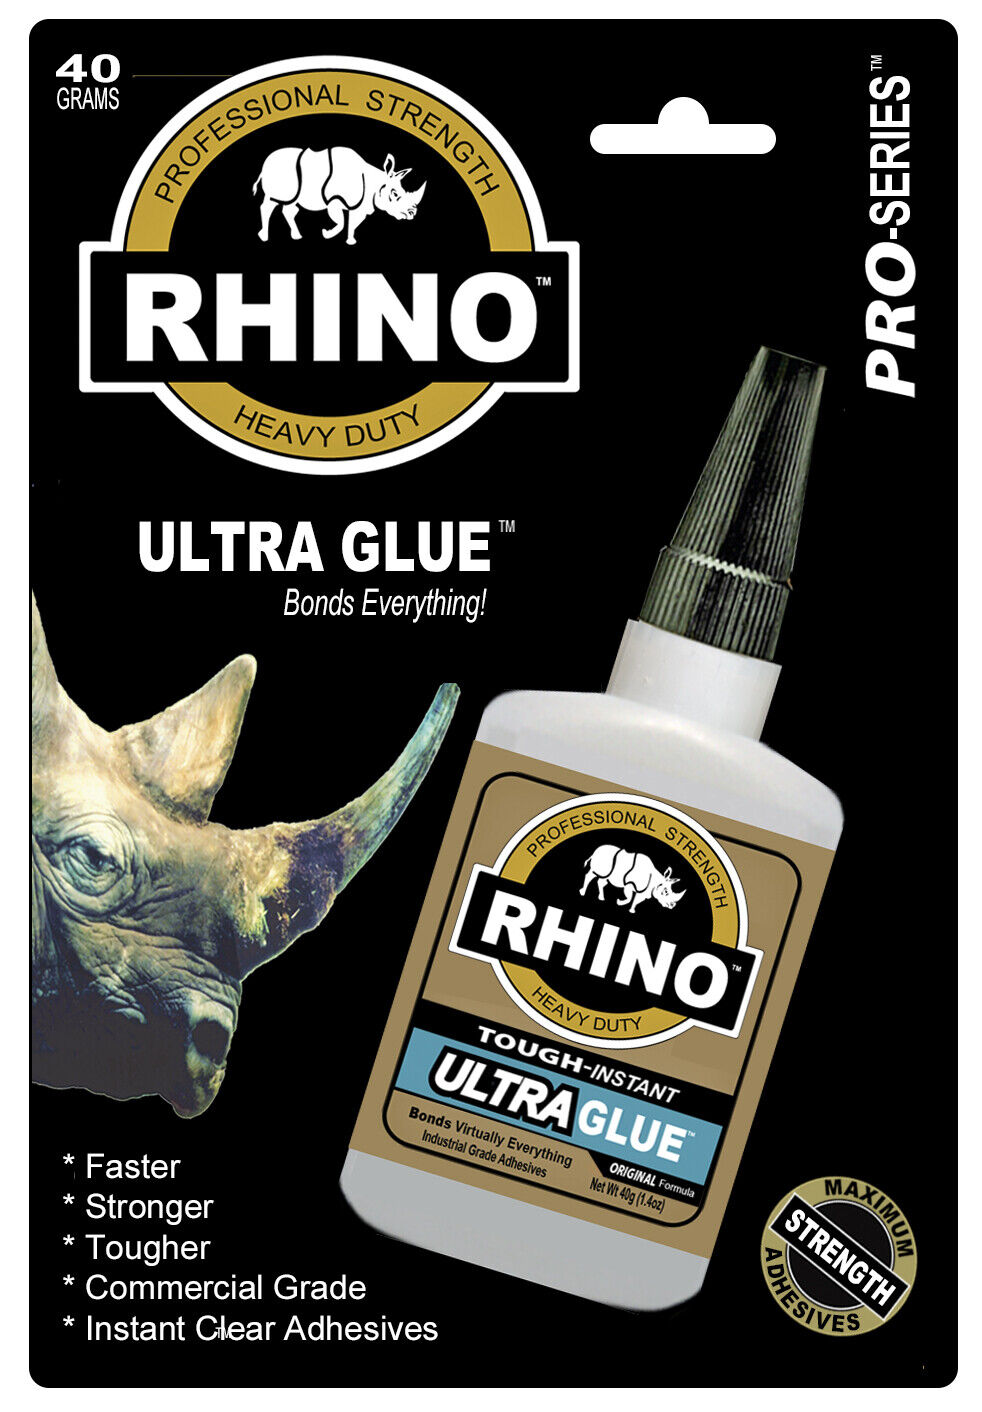 What Stores Sell Rhino Glue